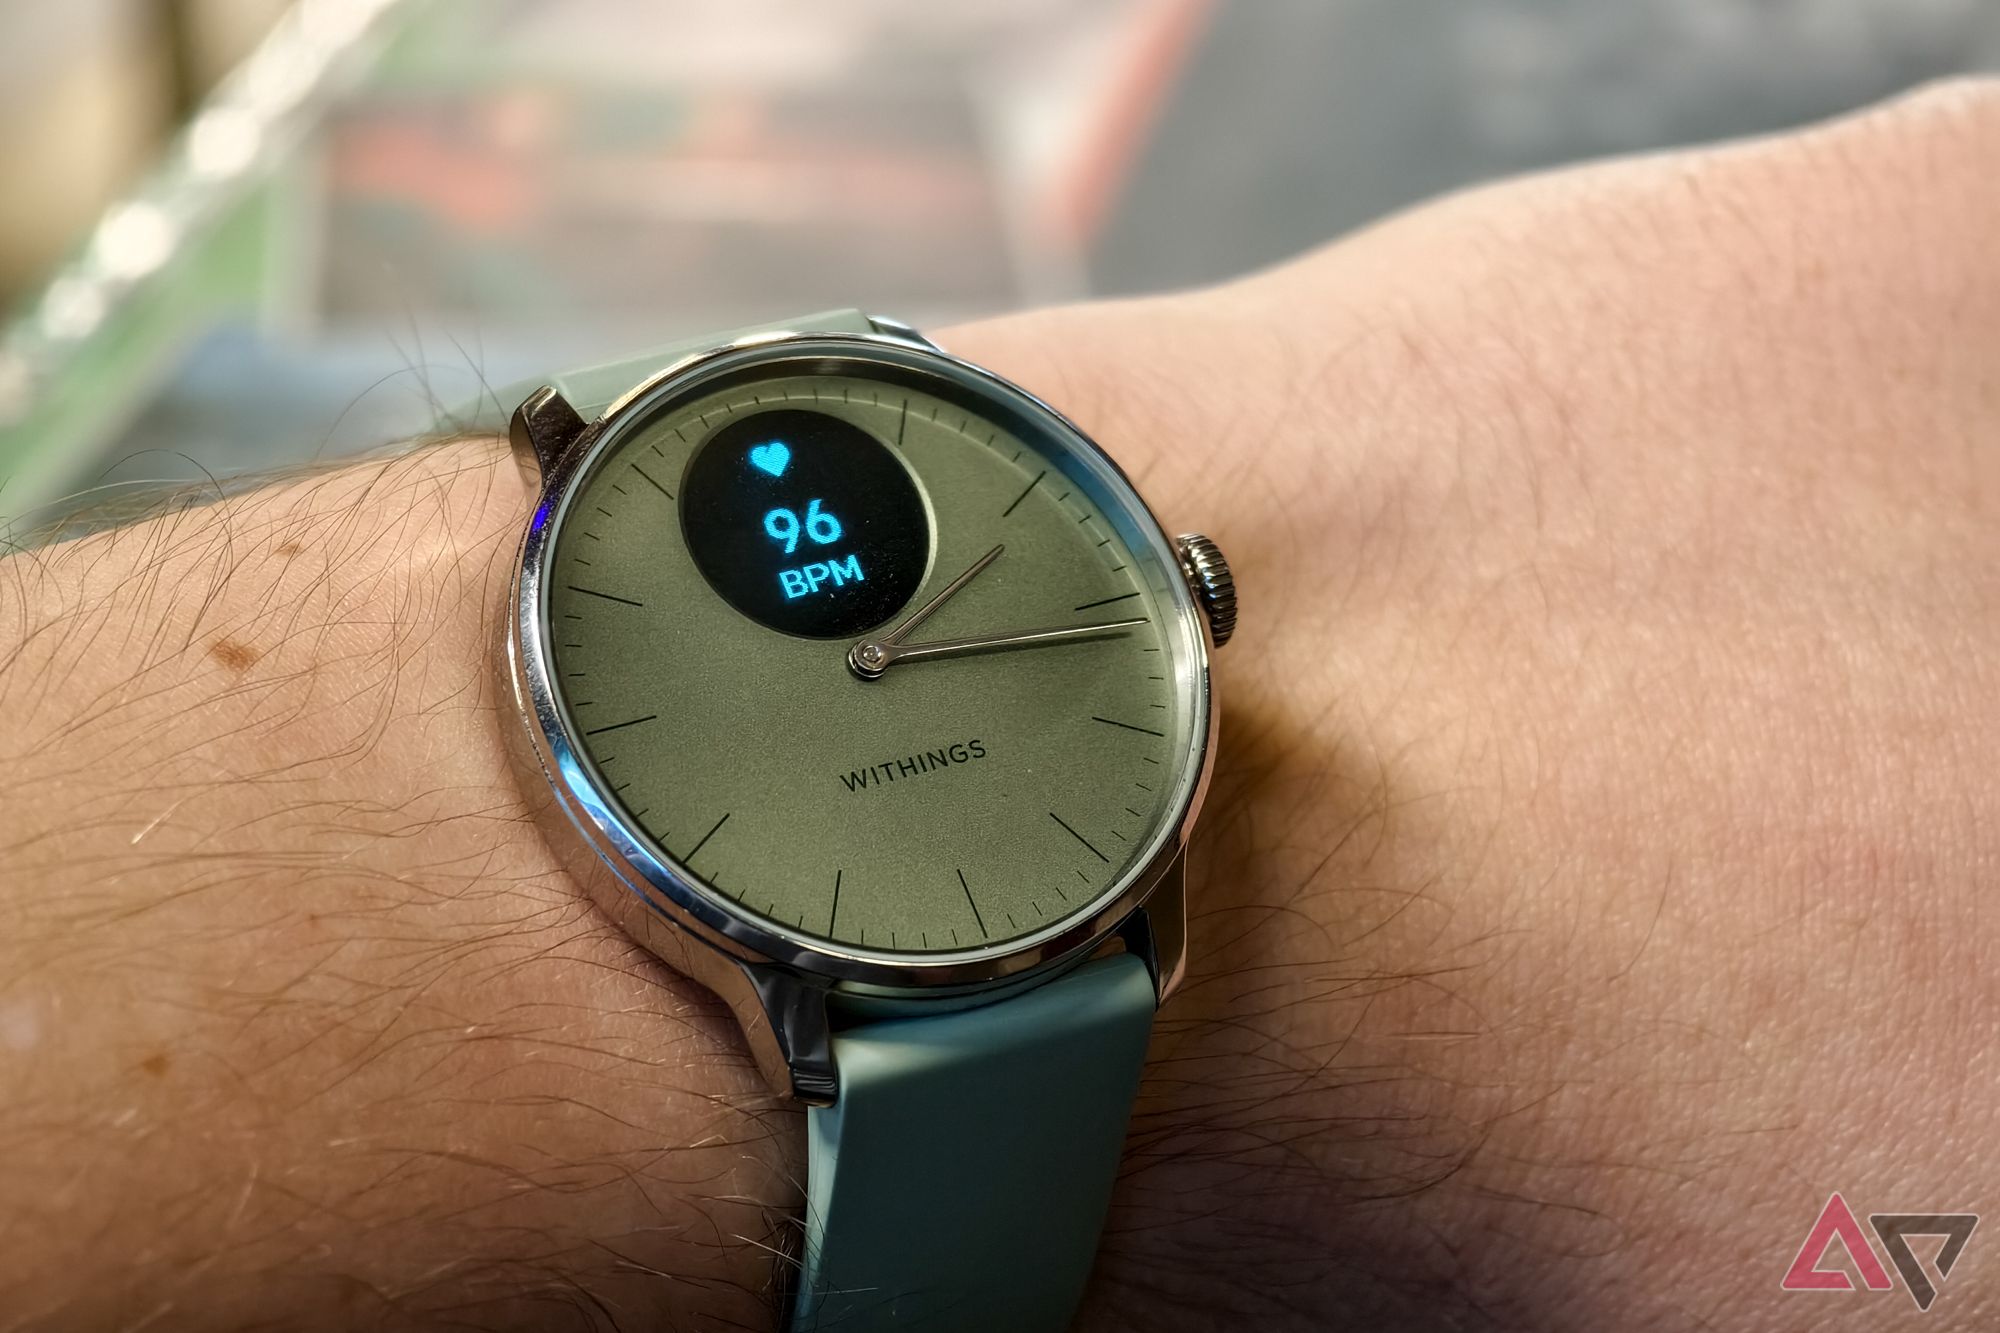 Withings ScanWatch Light in Green, with the display on, photographed on a man's wrist with a close-up on the watch face showing heartrate